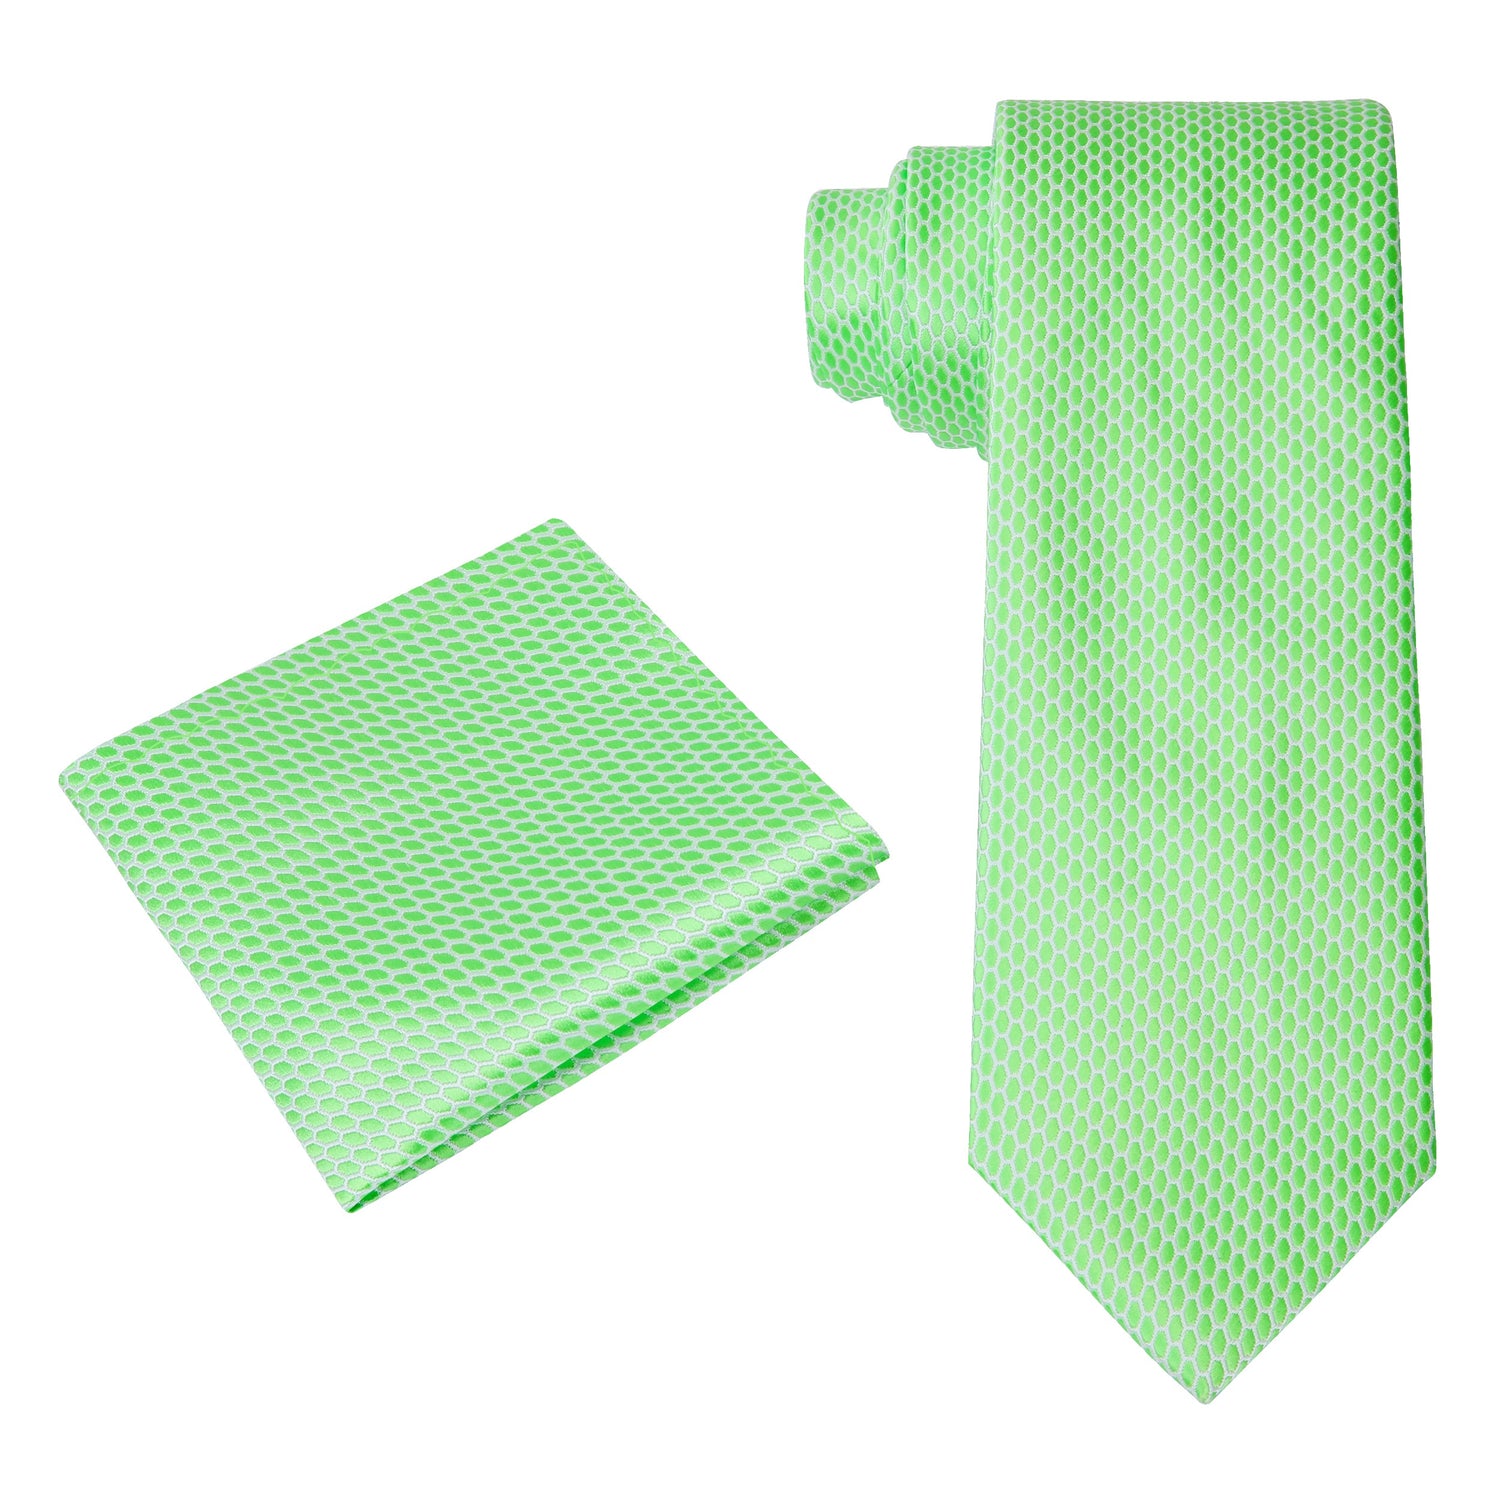 Alt View: A Bright Green, White Geometric Oval Shaped Pattern Silk Necktie, Matching Pocket Square